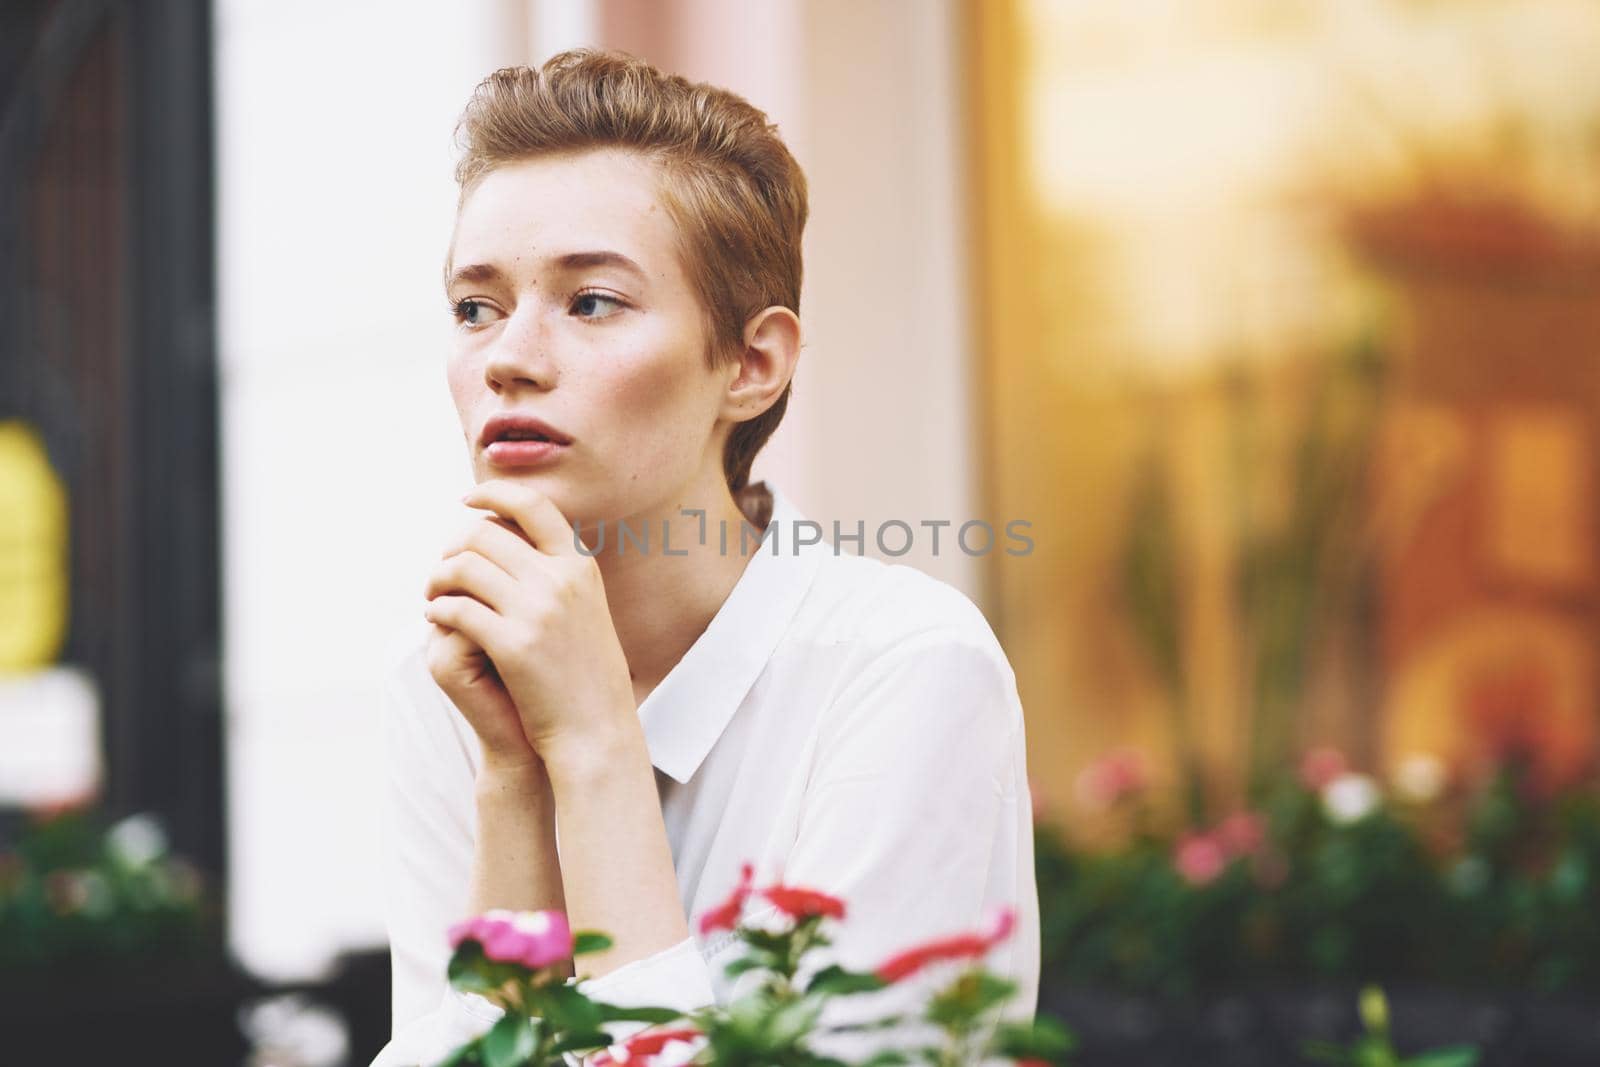 short haired woman reading walk in the fresh air education. High quality photo